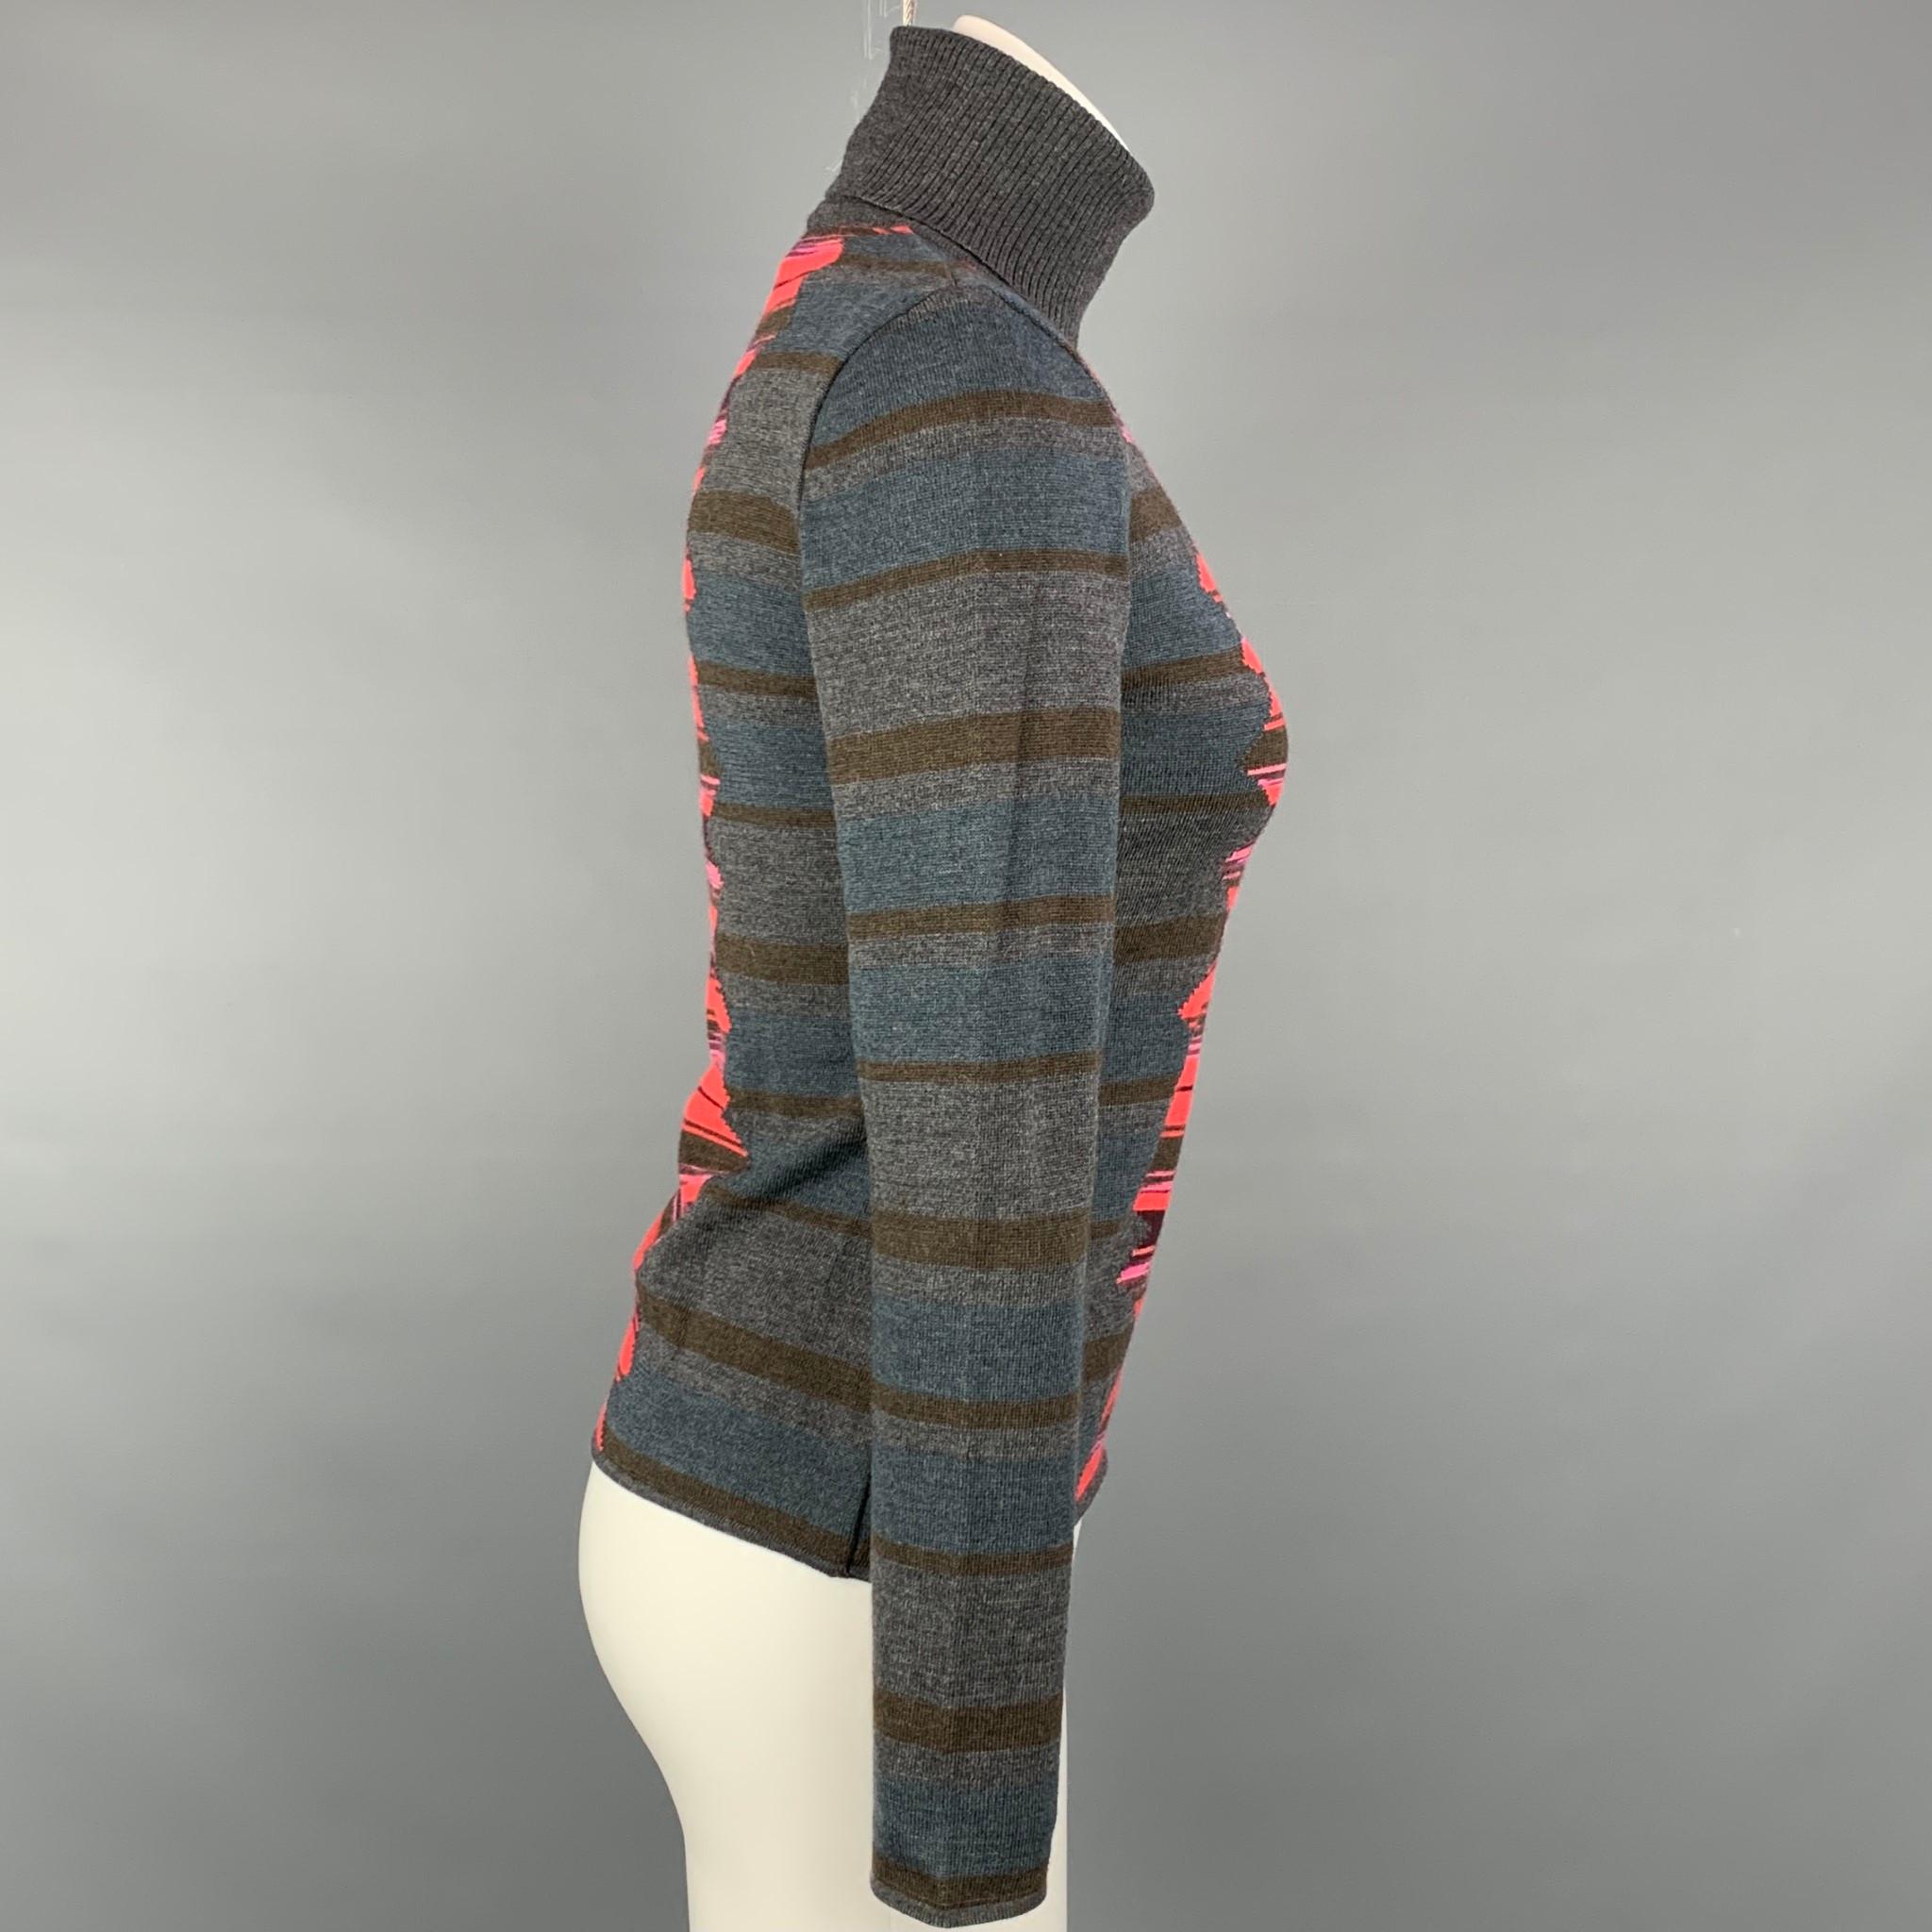 M MISSONI pullover comes in a grey & red merino wool / acrylic color block featuring a turtleneck.

Very Good Pre-Owned Condition.
Marked: 42

Measurements:

Shoulder: 15 in.
Bust: 32 in.
Sleeve: 22.5 in.
Length: 19 in. 